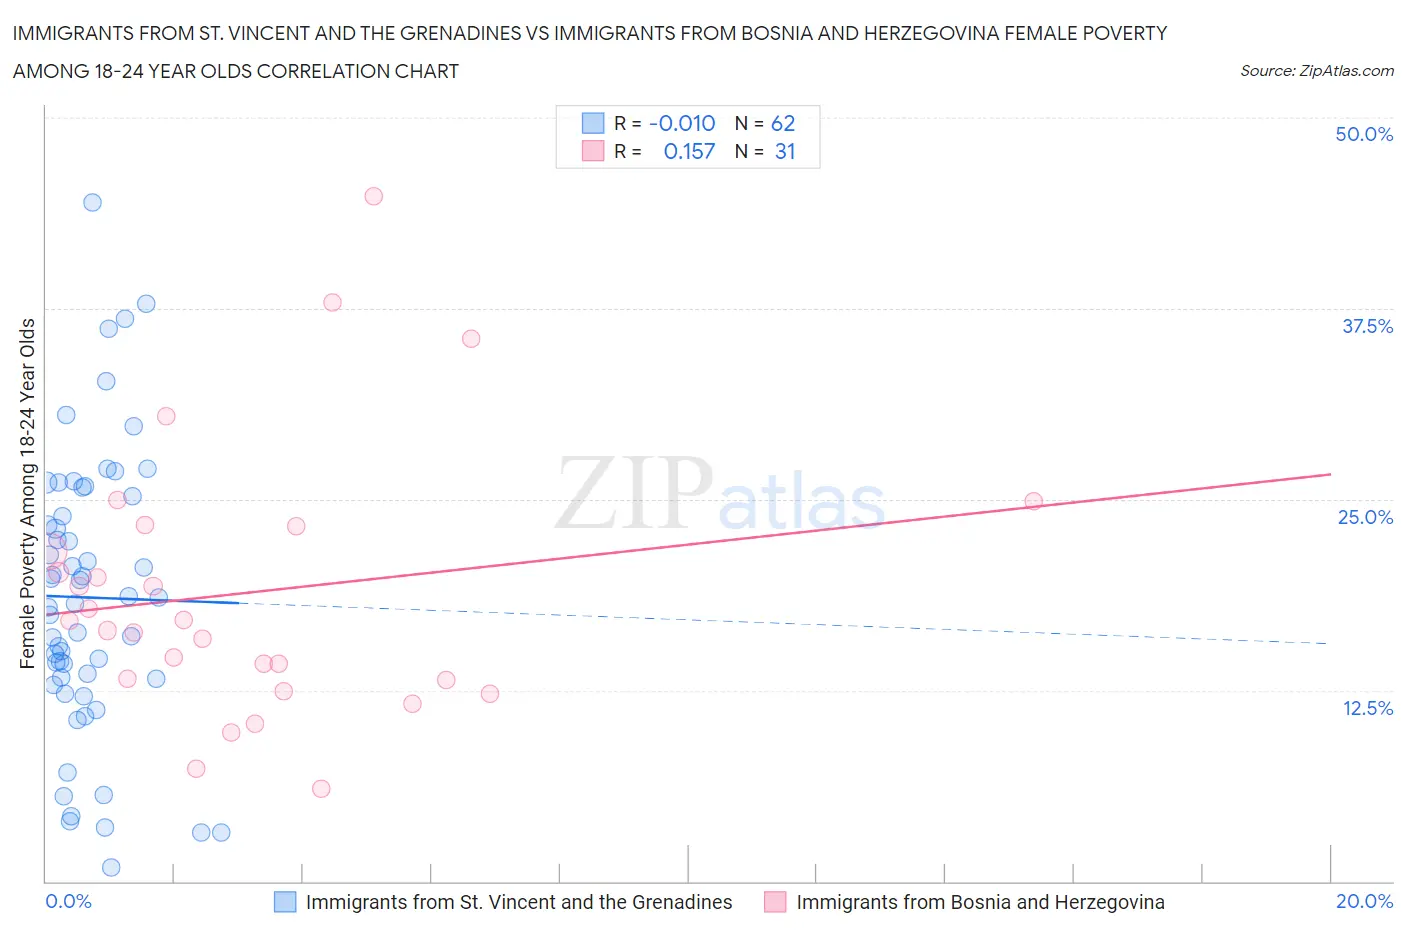 Immigrants from St. Vincent and the Grenadines vs Immigrants from Bosnia and Herzegovina Female Poverty Among 18-24 Year Olds